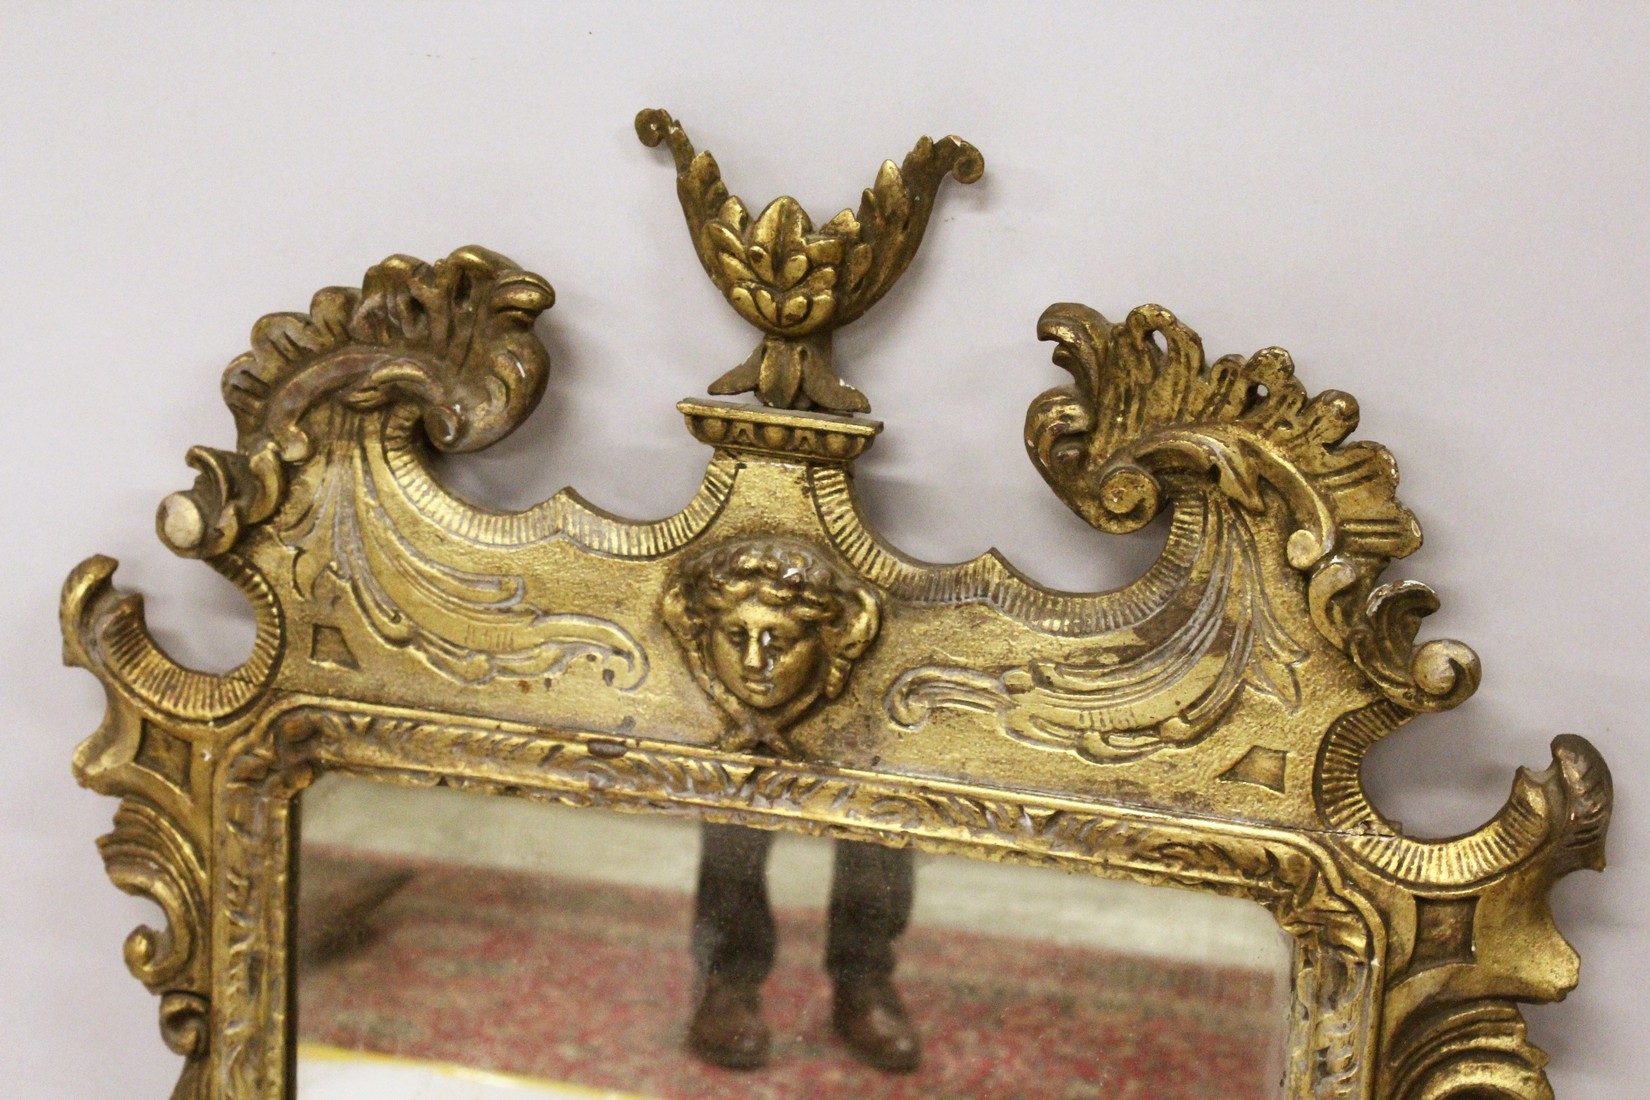 A GOOD GEORGE III DESIGN CARVED WOOD AND GILDED MIRROR with acanthus scrolls, masks and urns. 3ft - Image 2 of 3